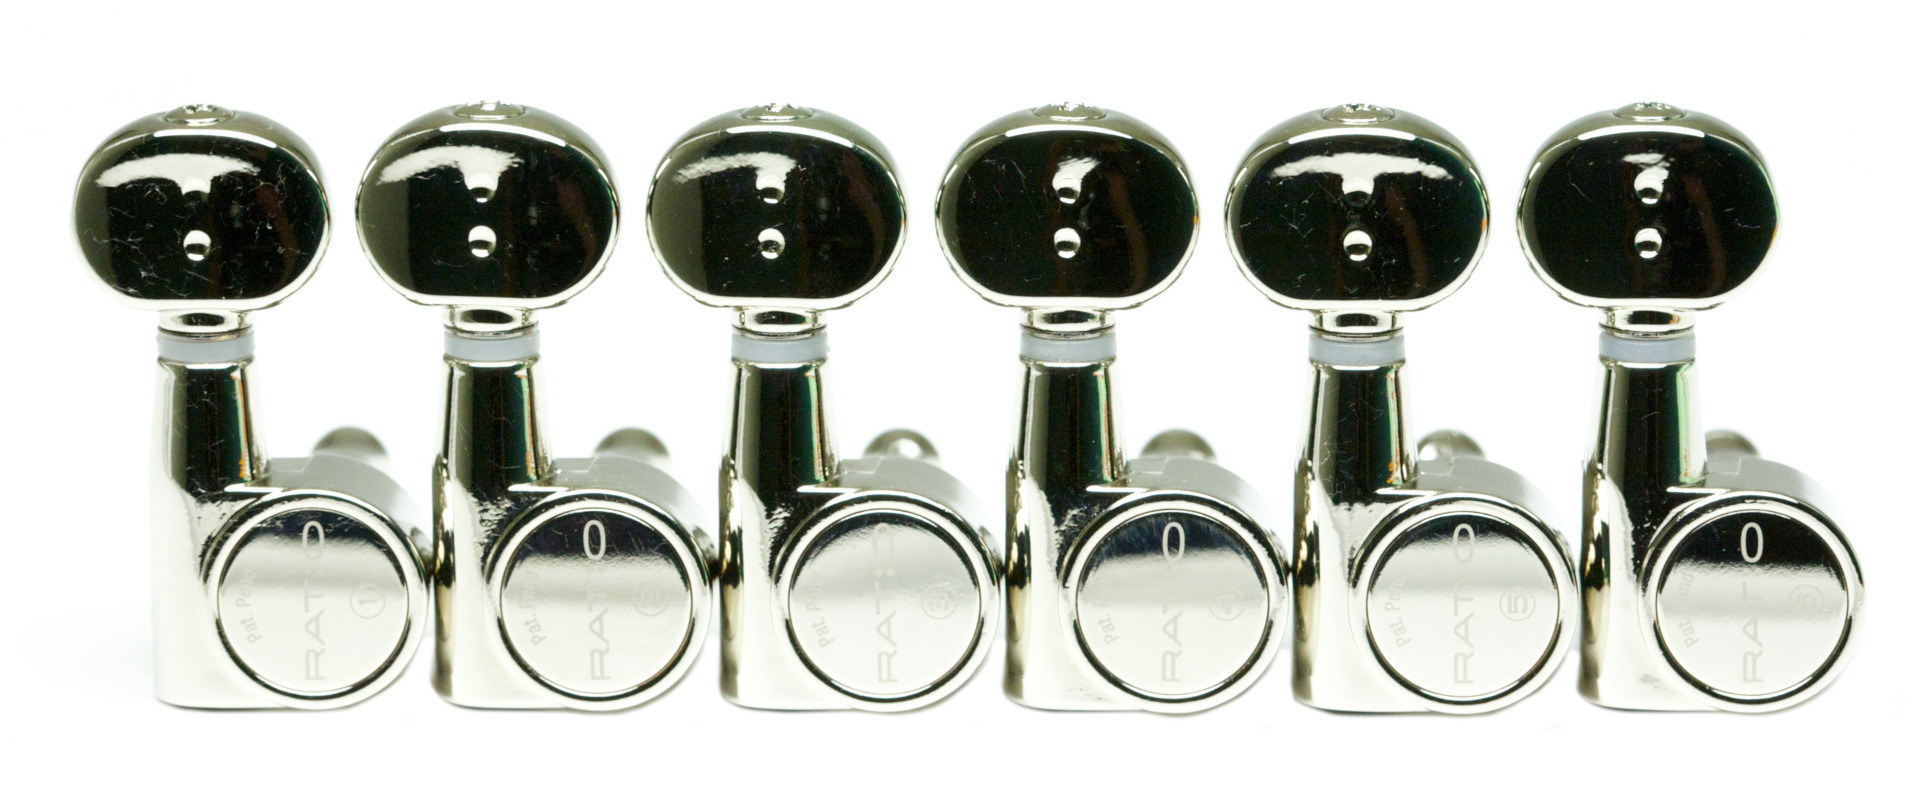 Graph Tech PRN-2731-N0 Ratio Electric Guitar Machine Heads with Classic Button - 6-in-Line, Bass Side (Left) - Nickel